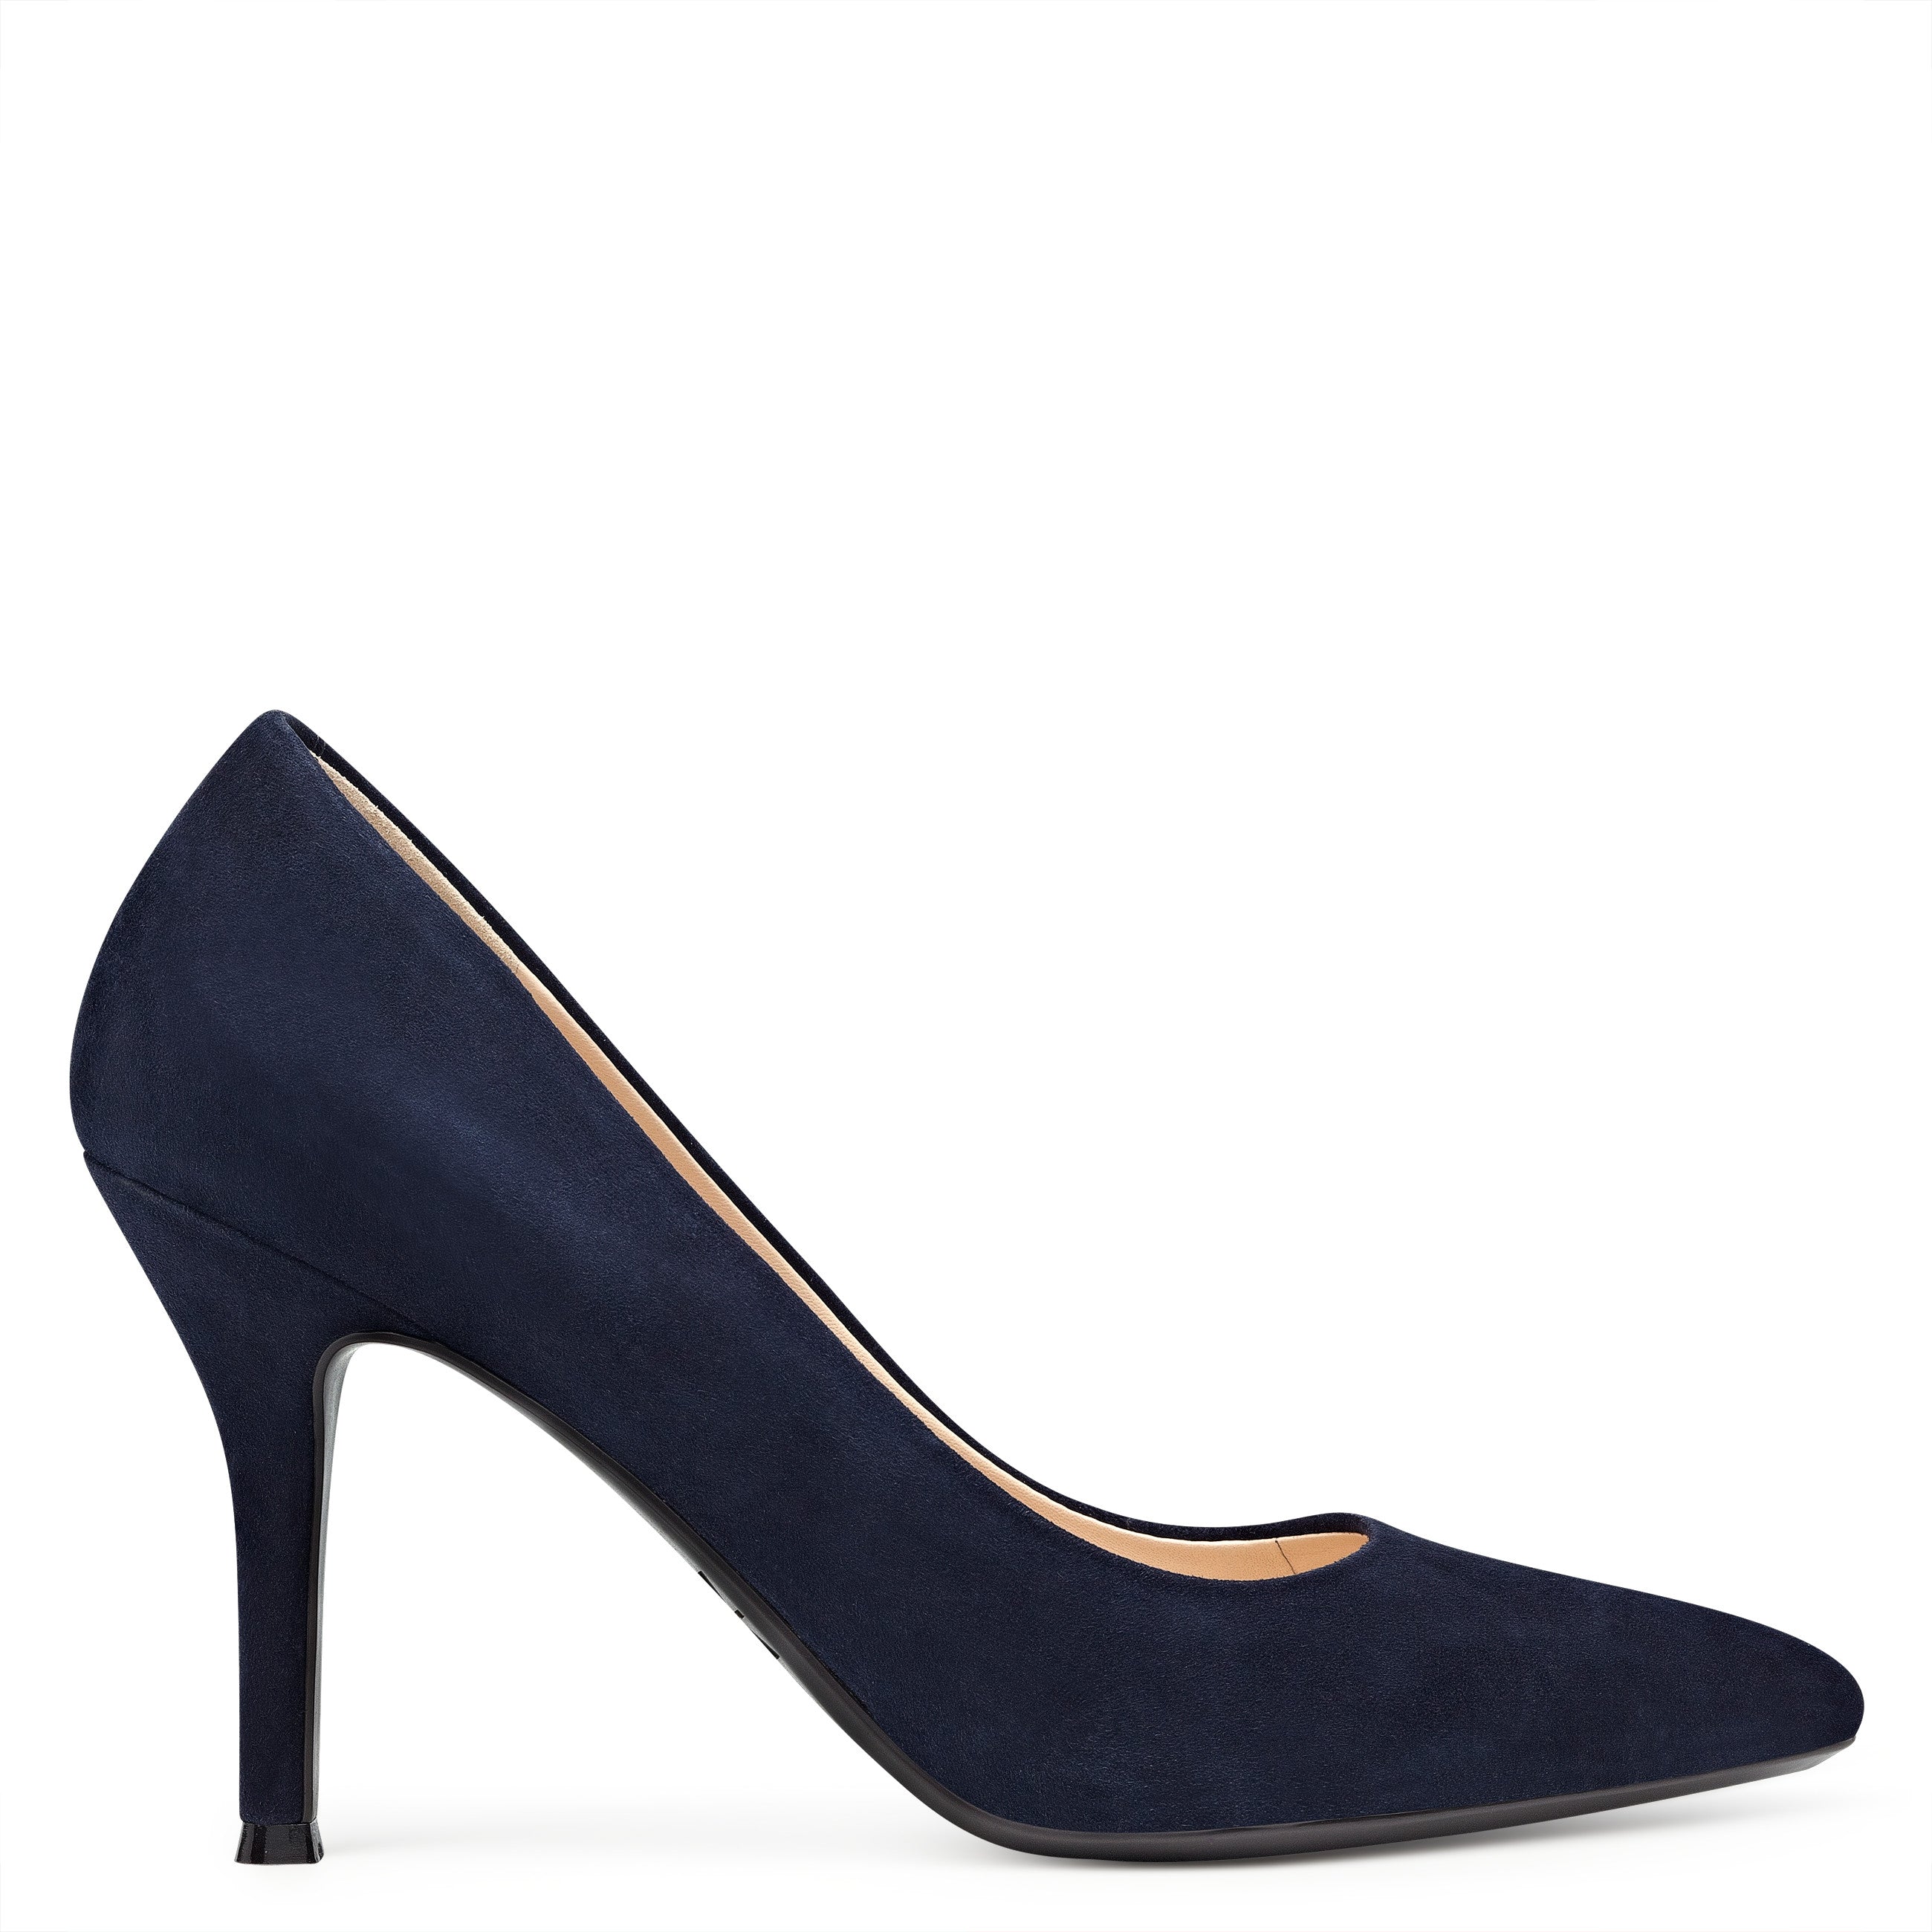 Fifth 9x9 Pointy Toe Pumps - Nine West